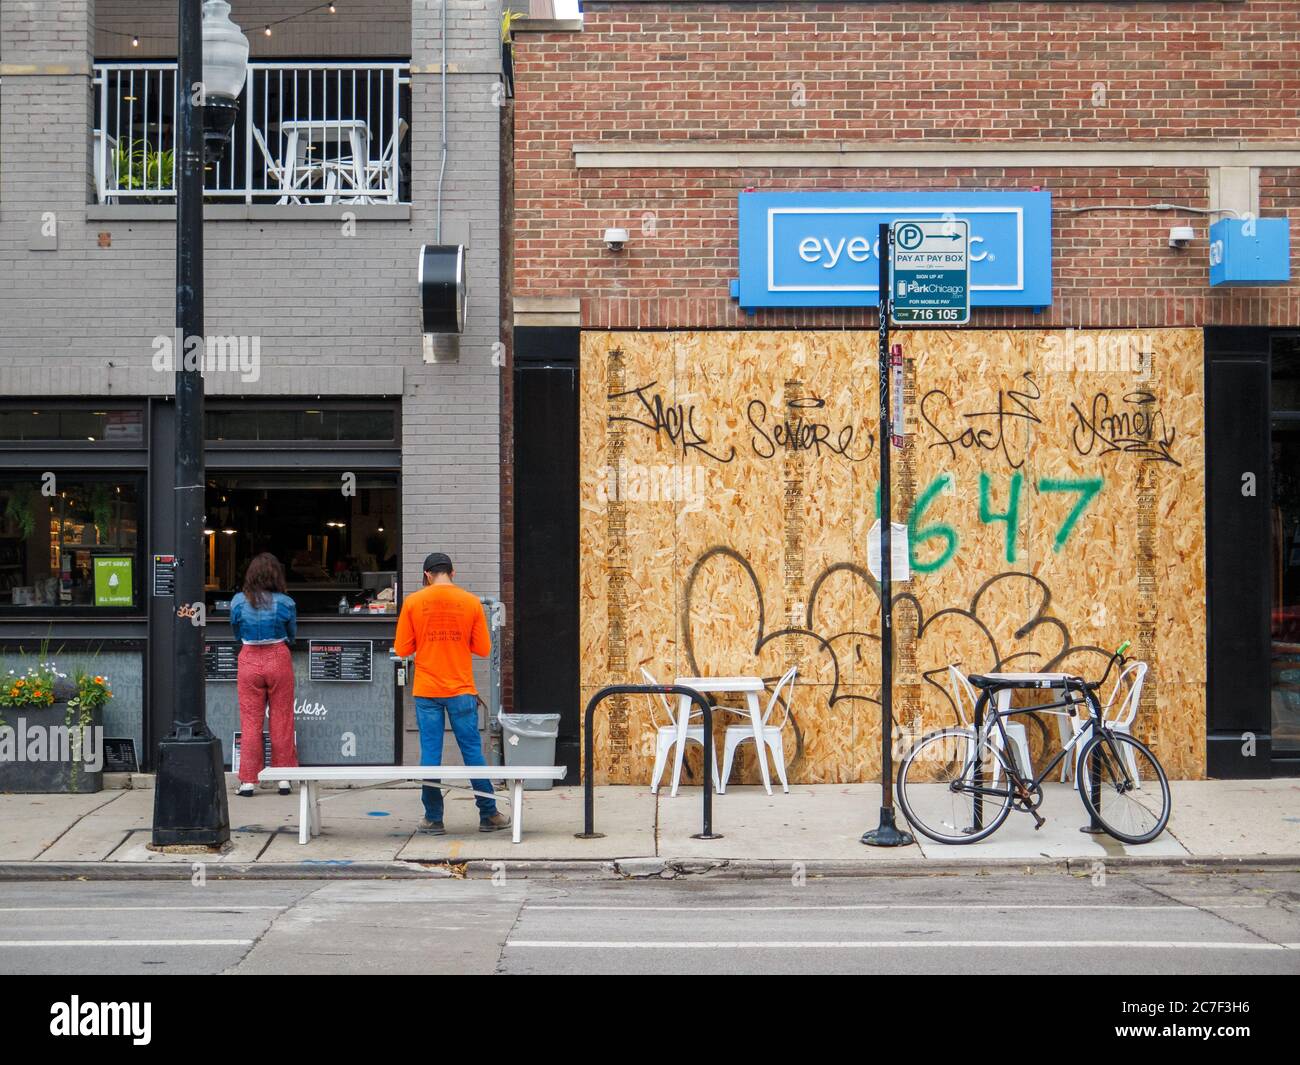 Boarded up storefront, result of recent civil unrest. Walk up café window with patrons. Bucktown neighborhood, Chicago, Illinois. Stock Photo